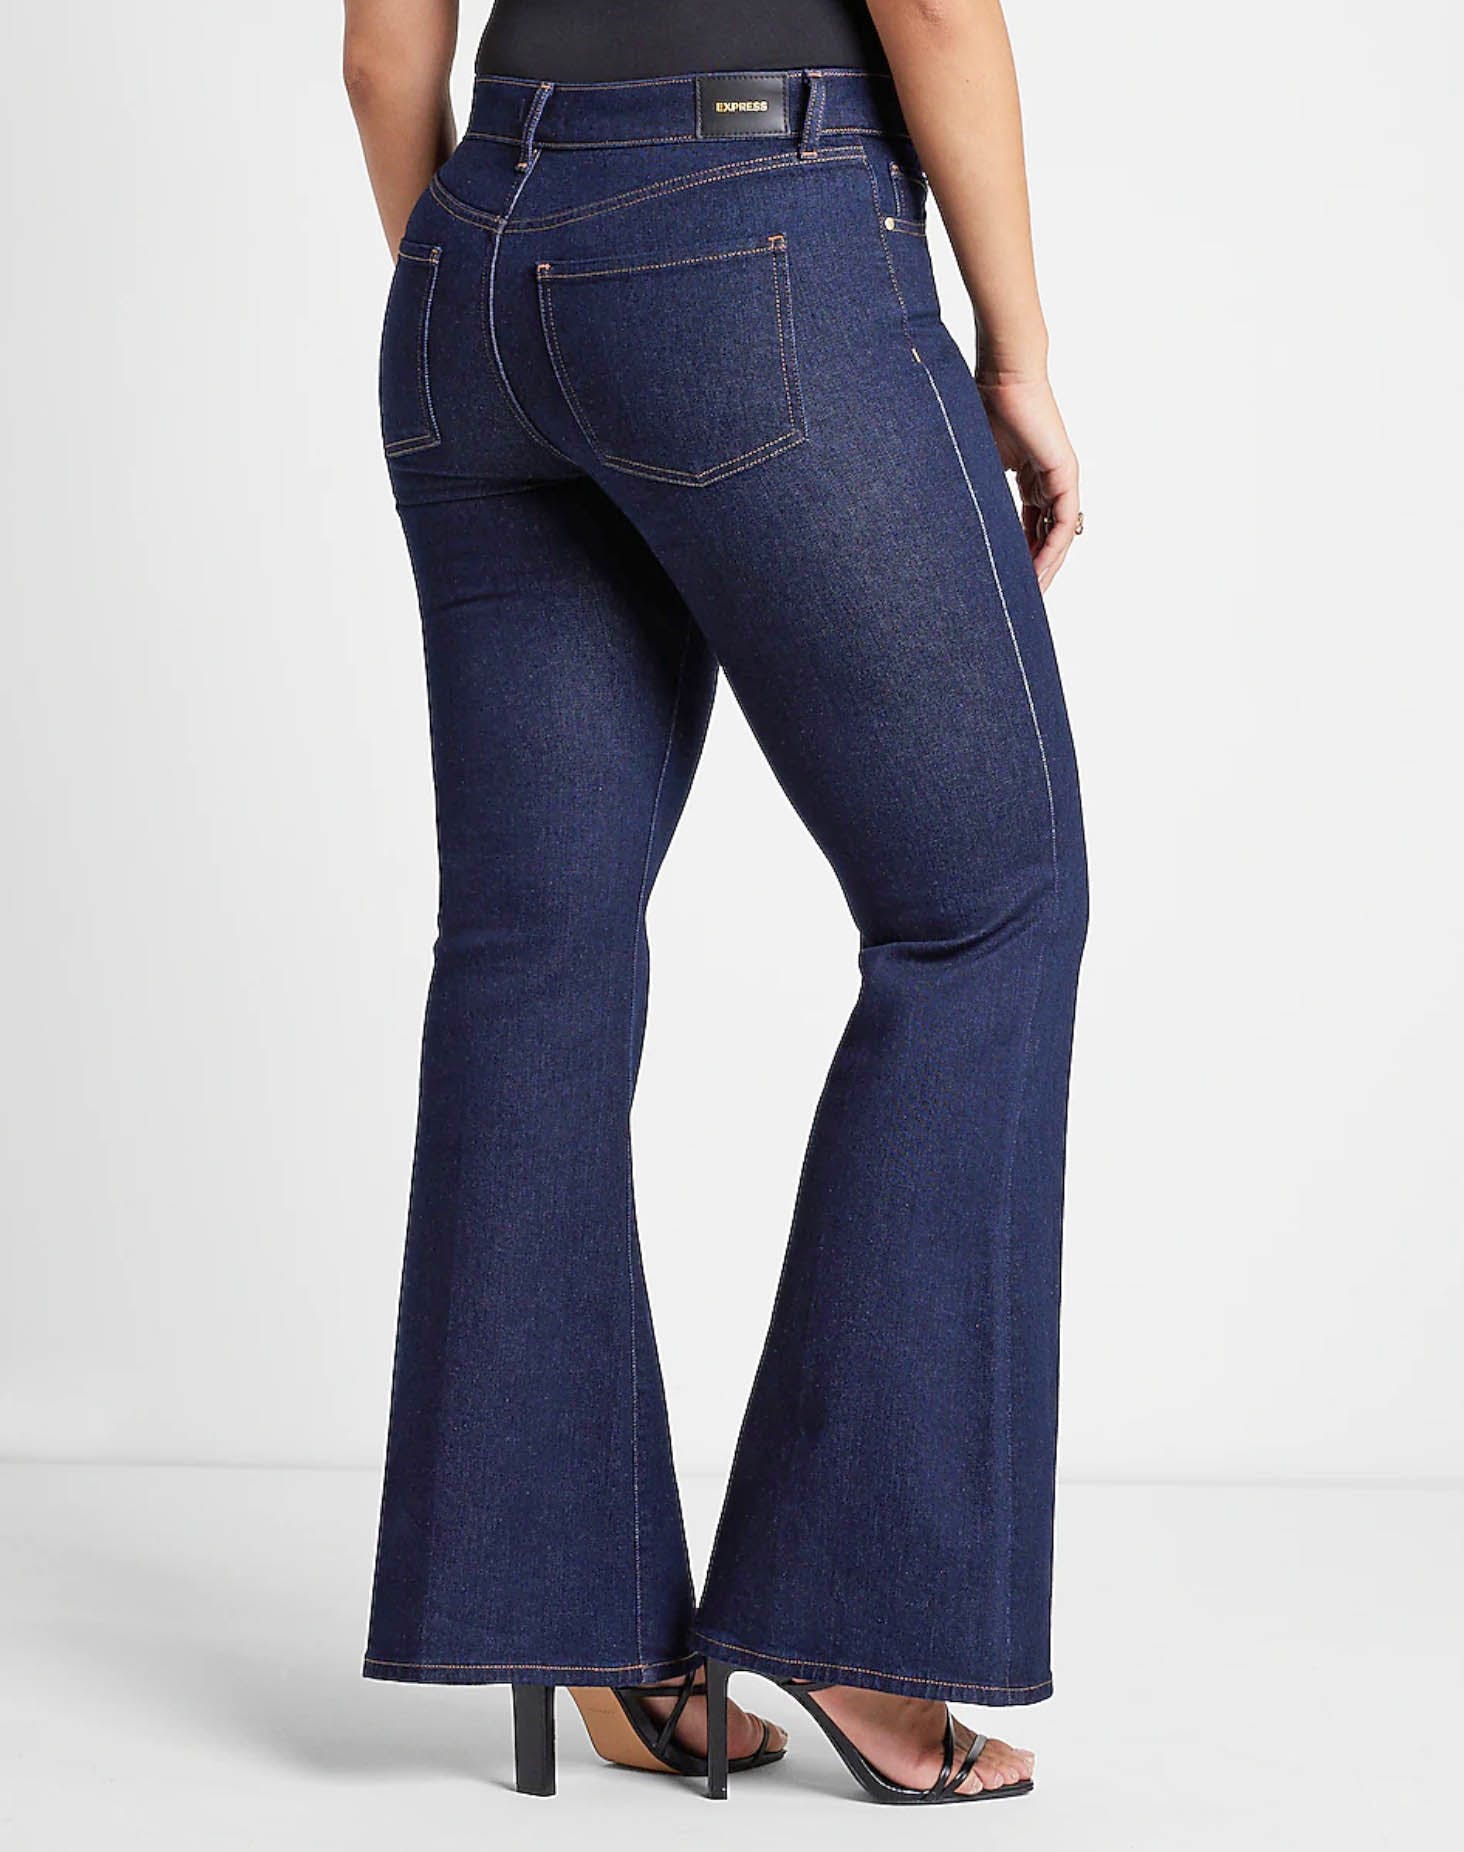 Low-Rise Jeans Are Back, and So Is My Emotional Baggage - PureWow